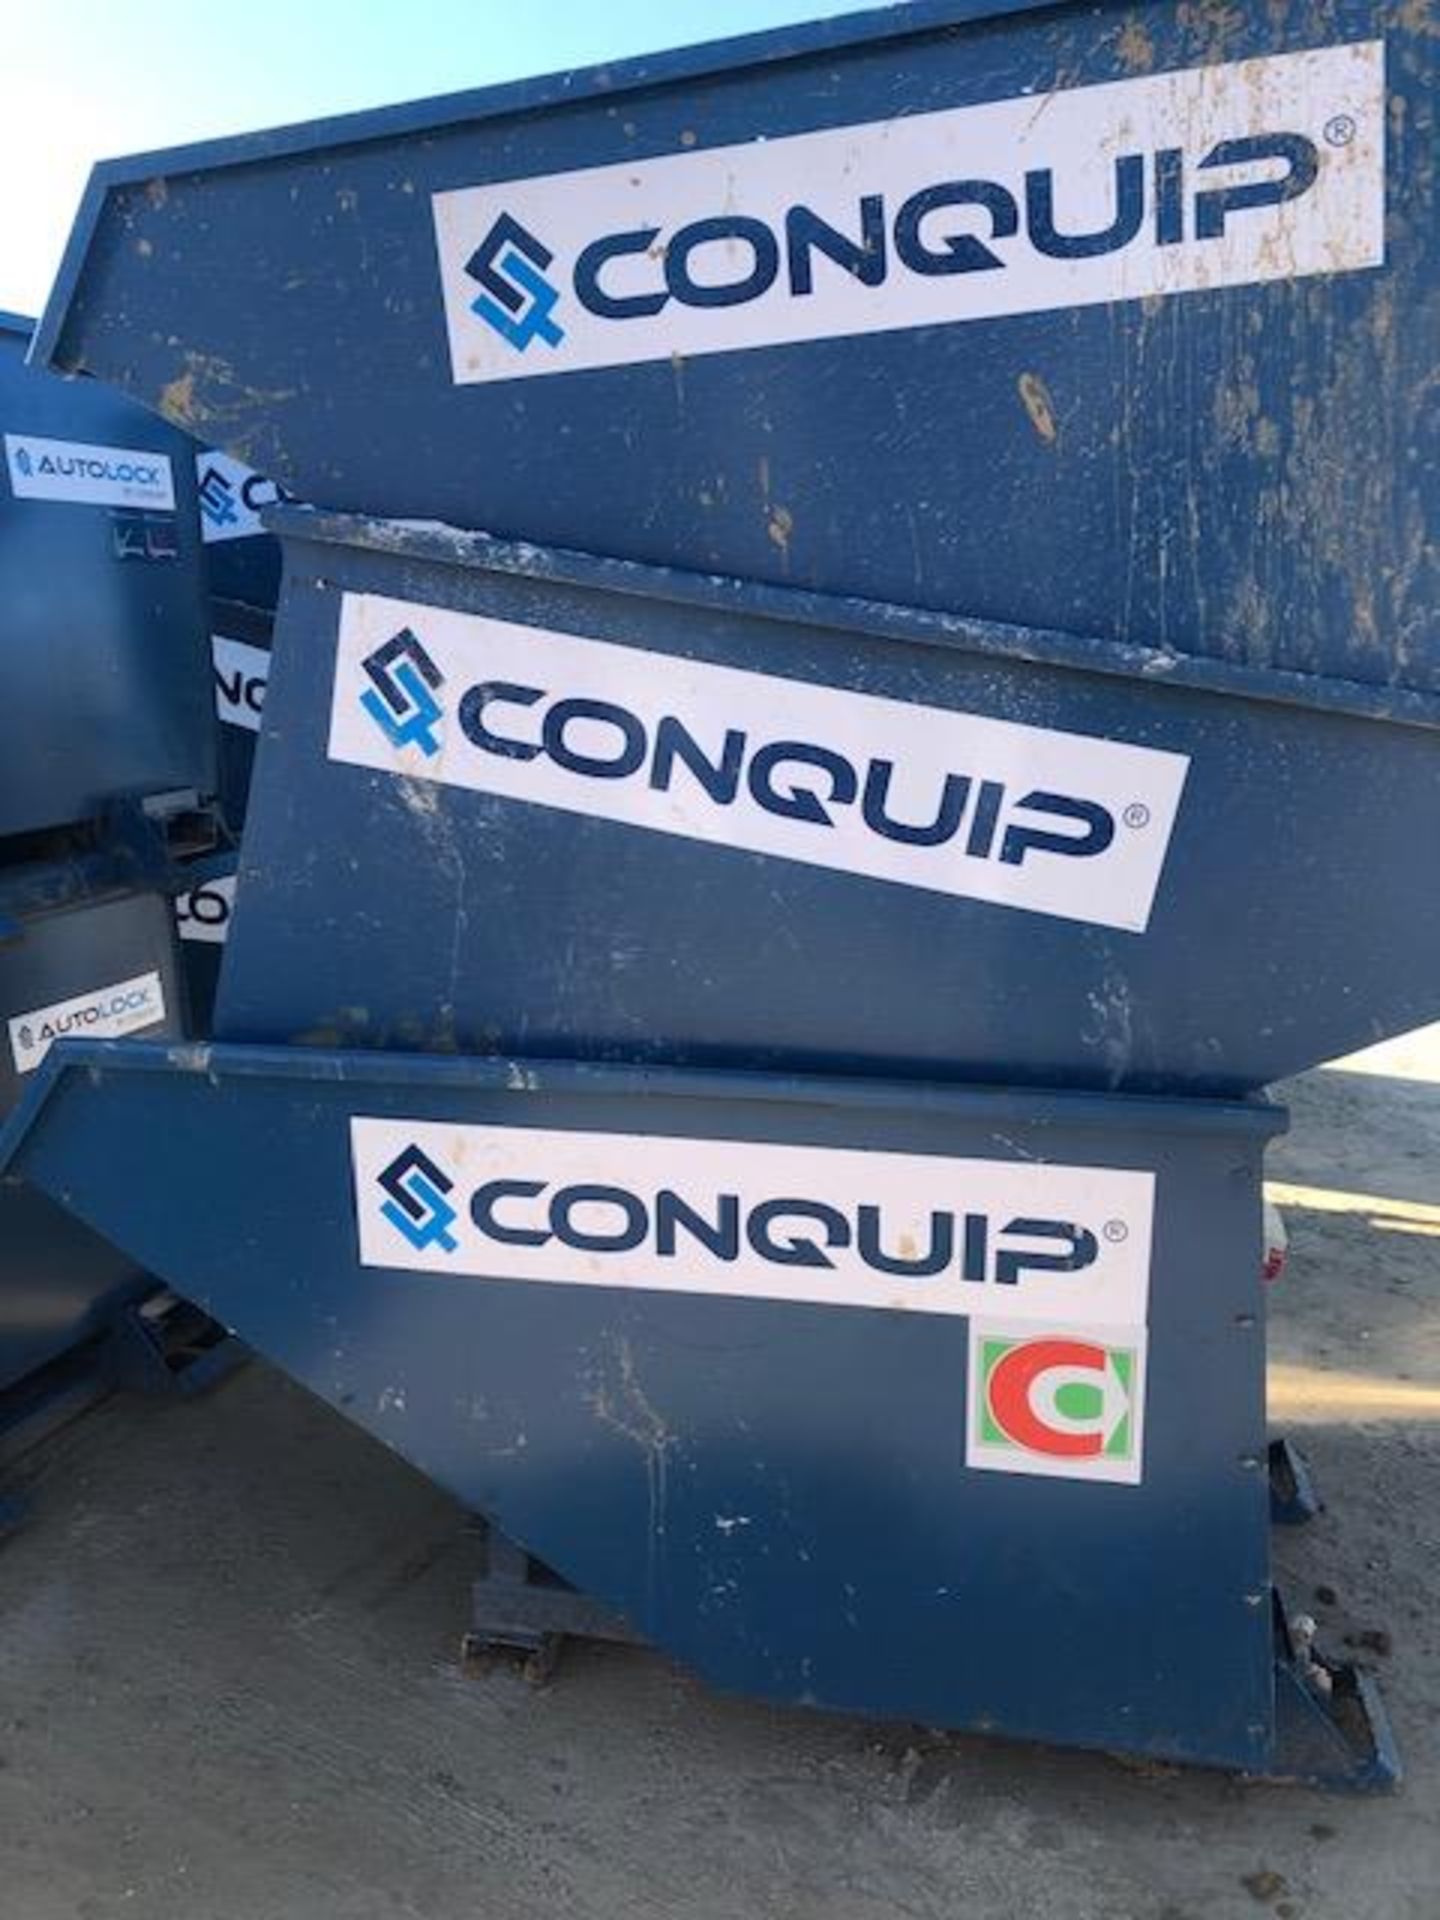 ** NEW LOT** 18 x Conquip tipping skips (delivered new Feb 2020) - located Dover Kent UK